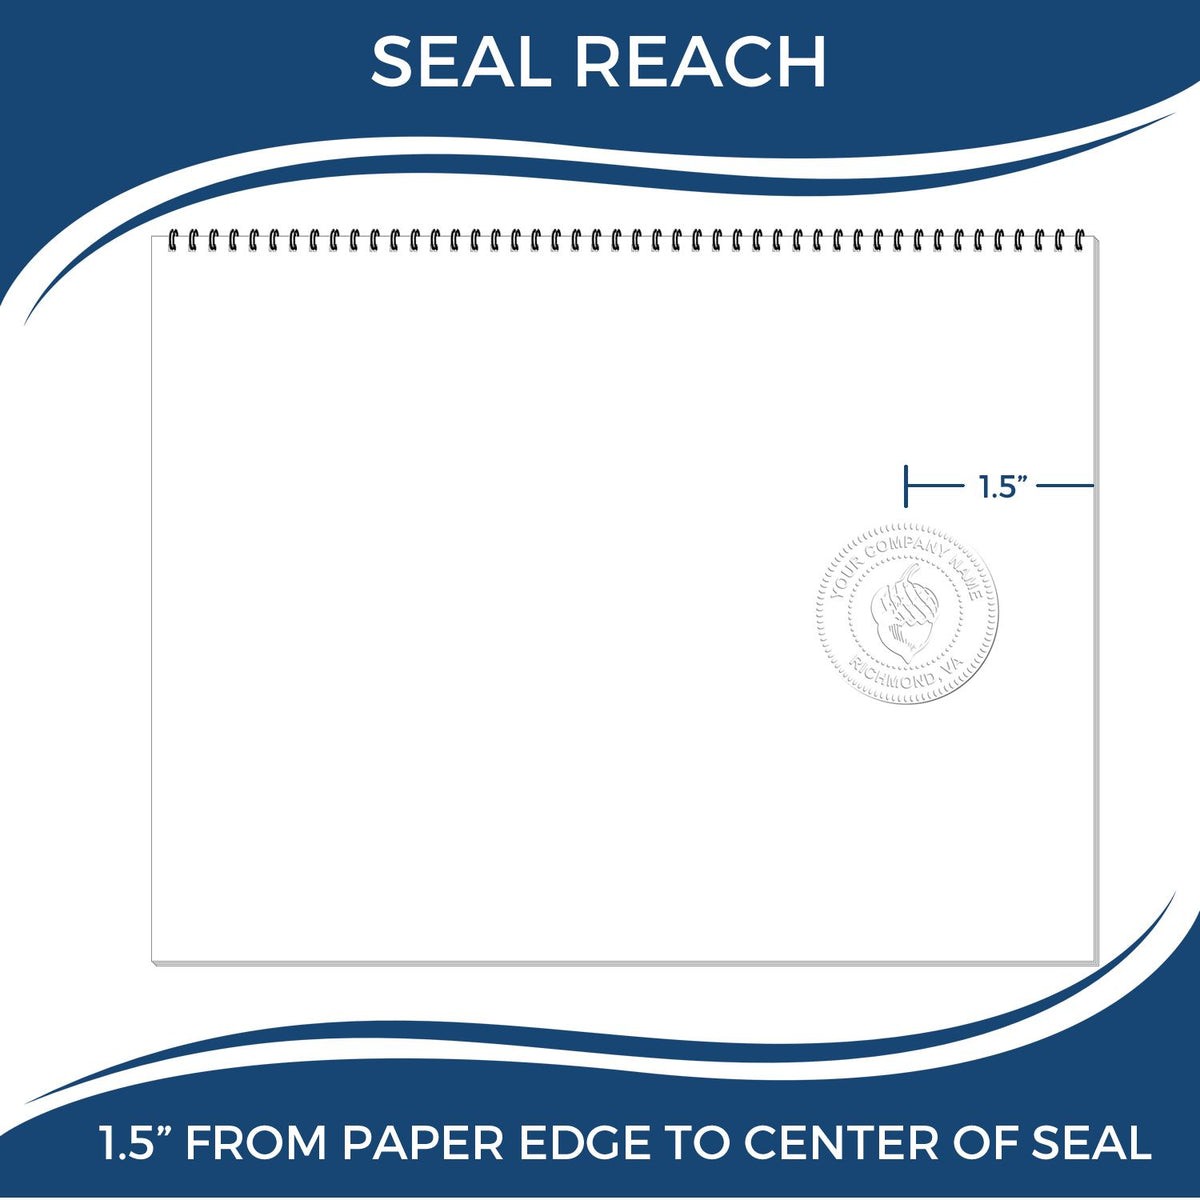 An infographic showing the seal reach which is represented by a ruler and a miniature seal image of the Hybrid South Dakota Land Surveyor Seal